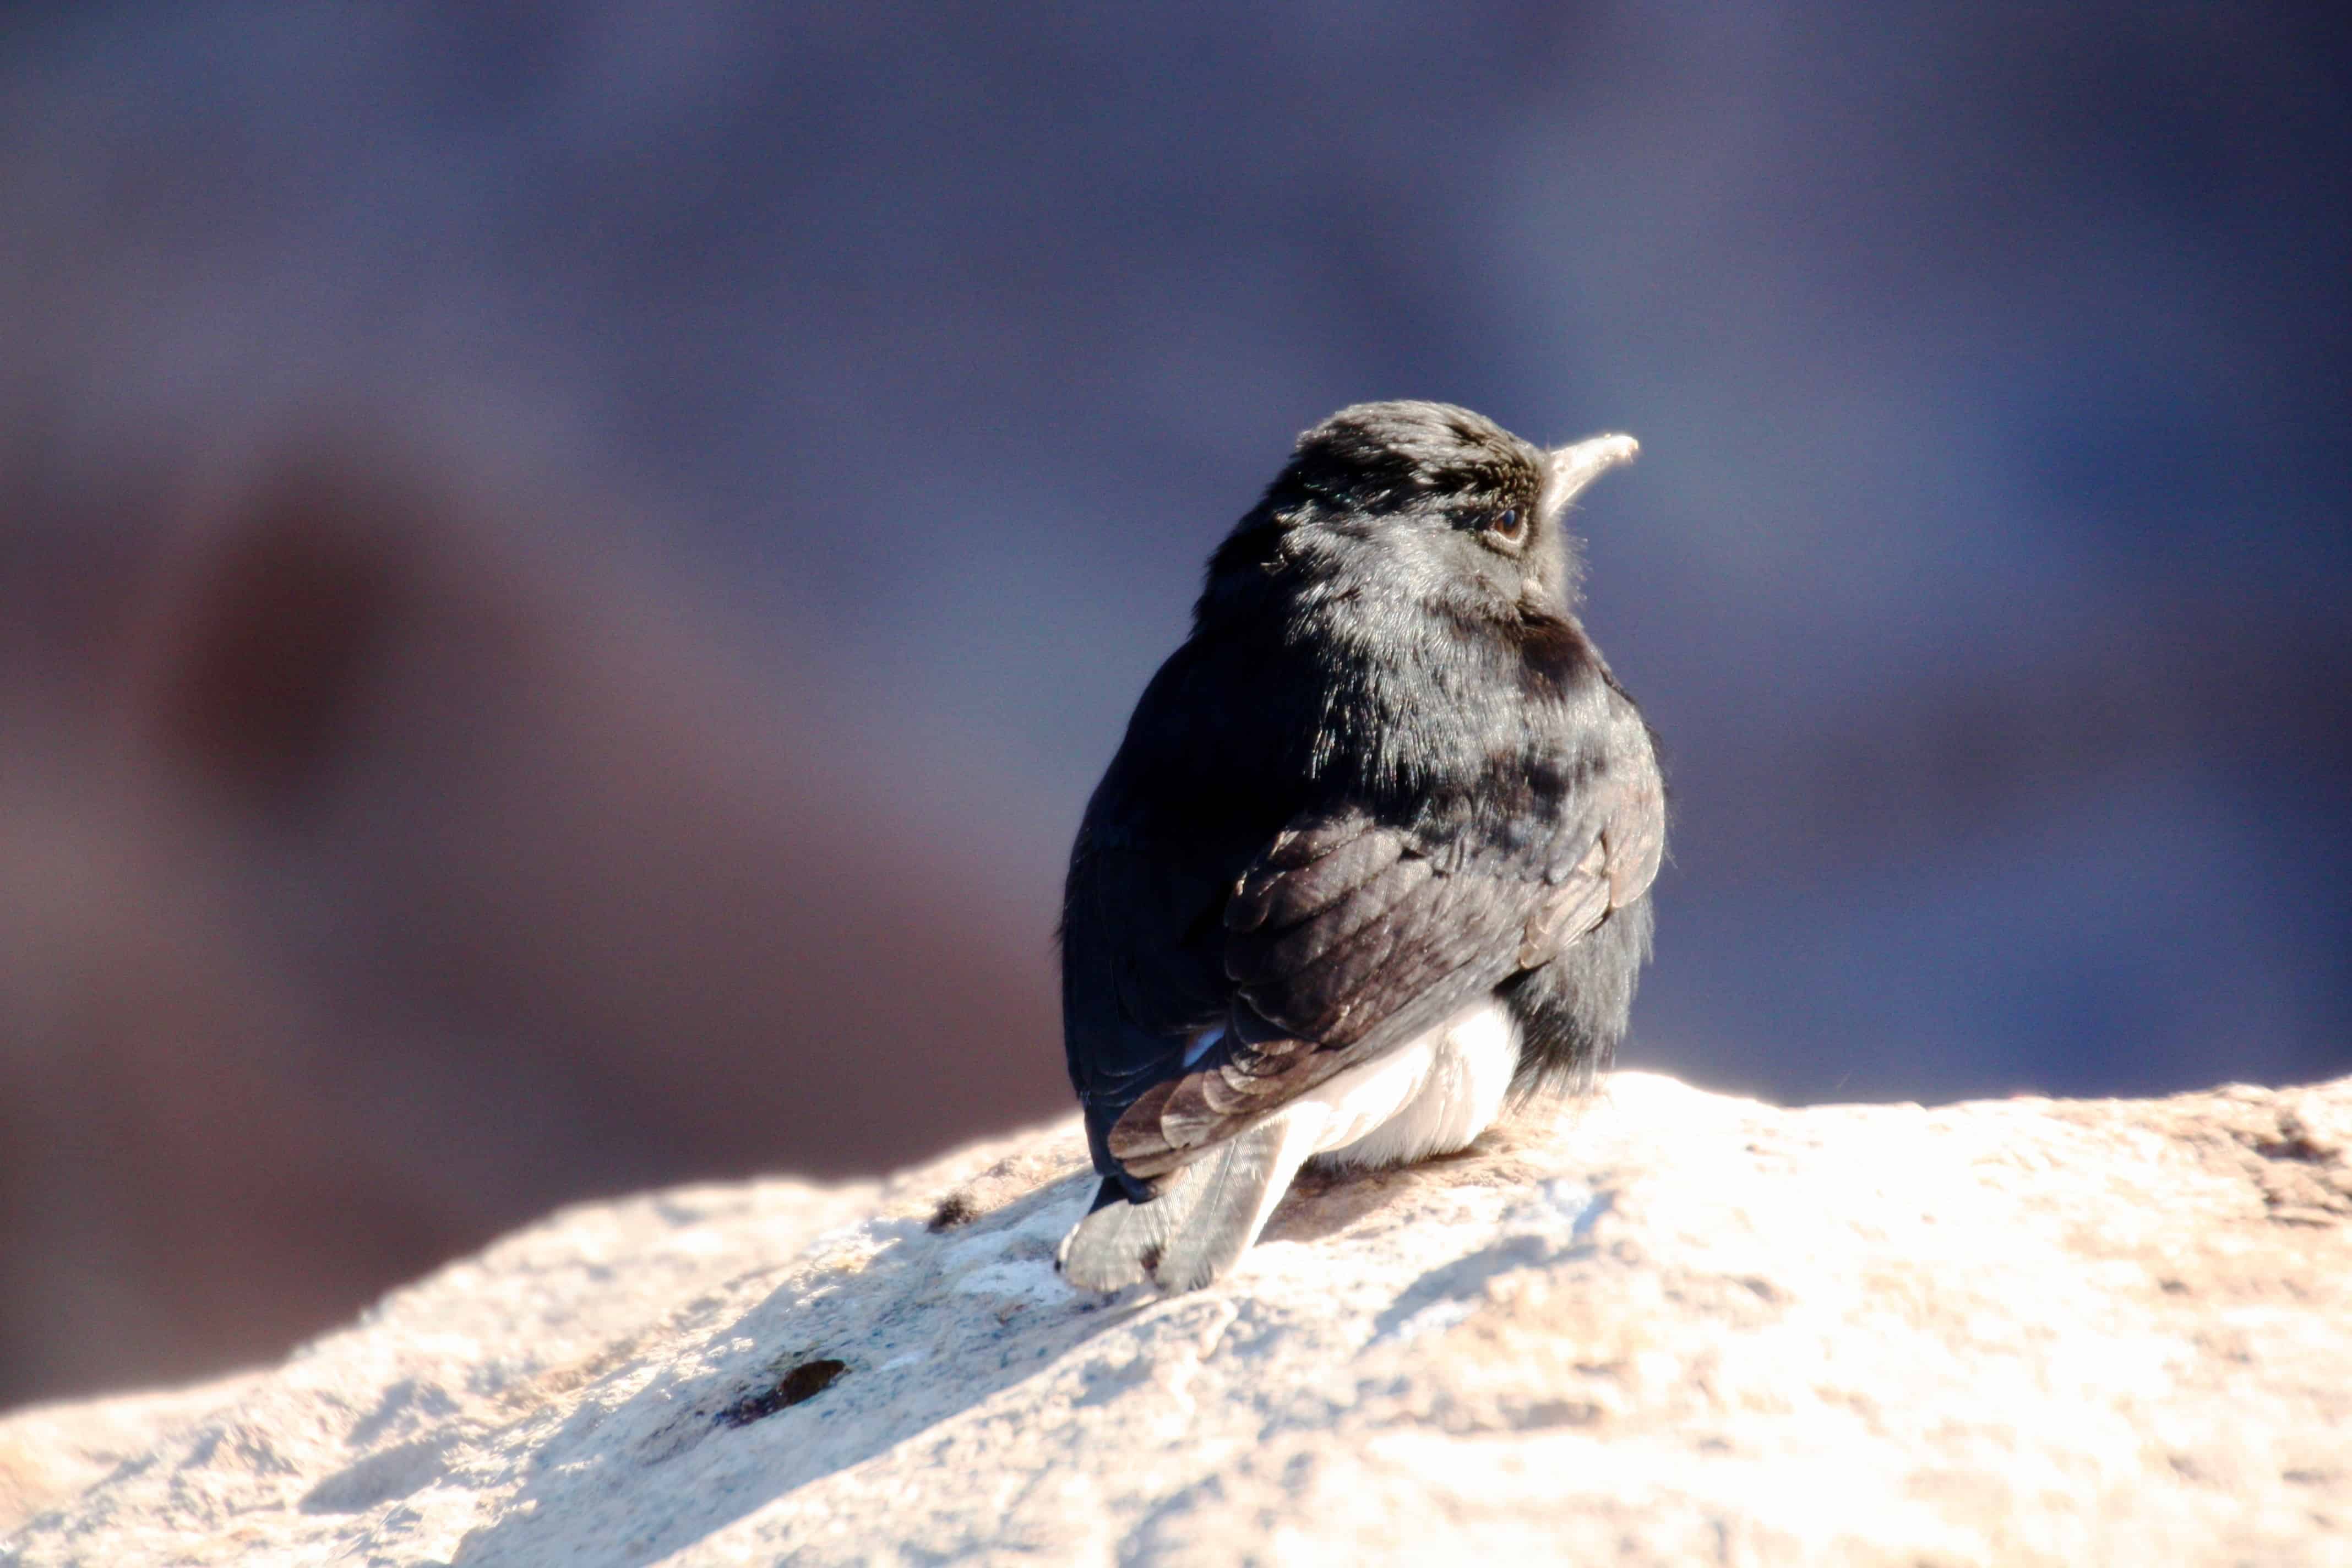 Feathered visitor at the peak of Mount Sinai, Egypt